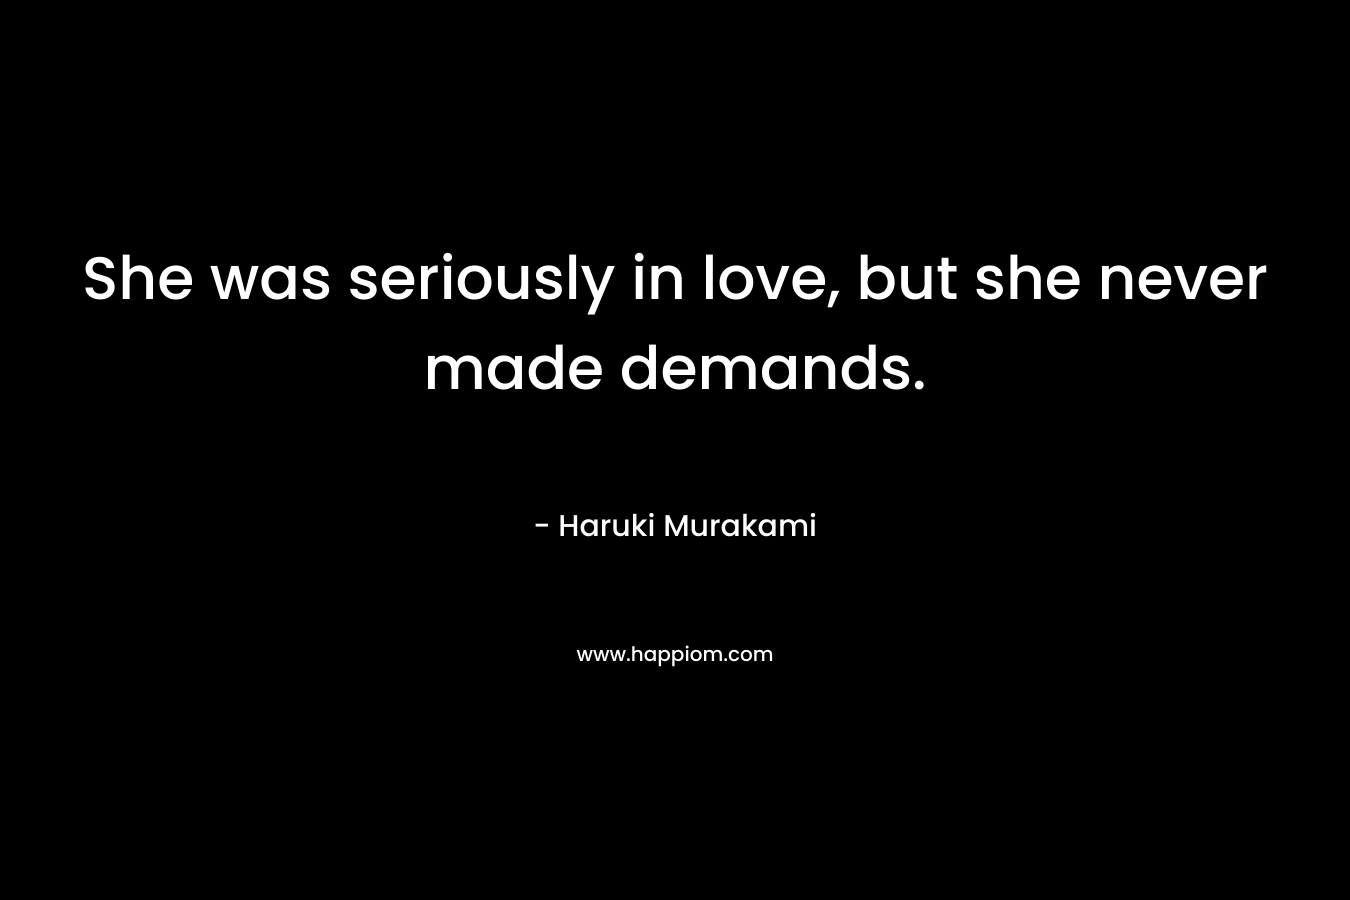 She was seriously in love, but she never made demands.